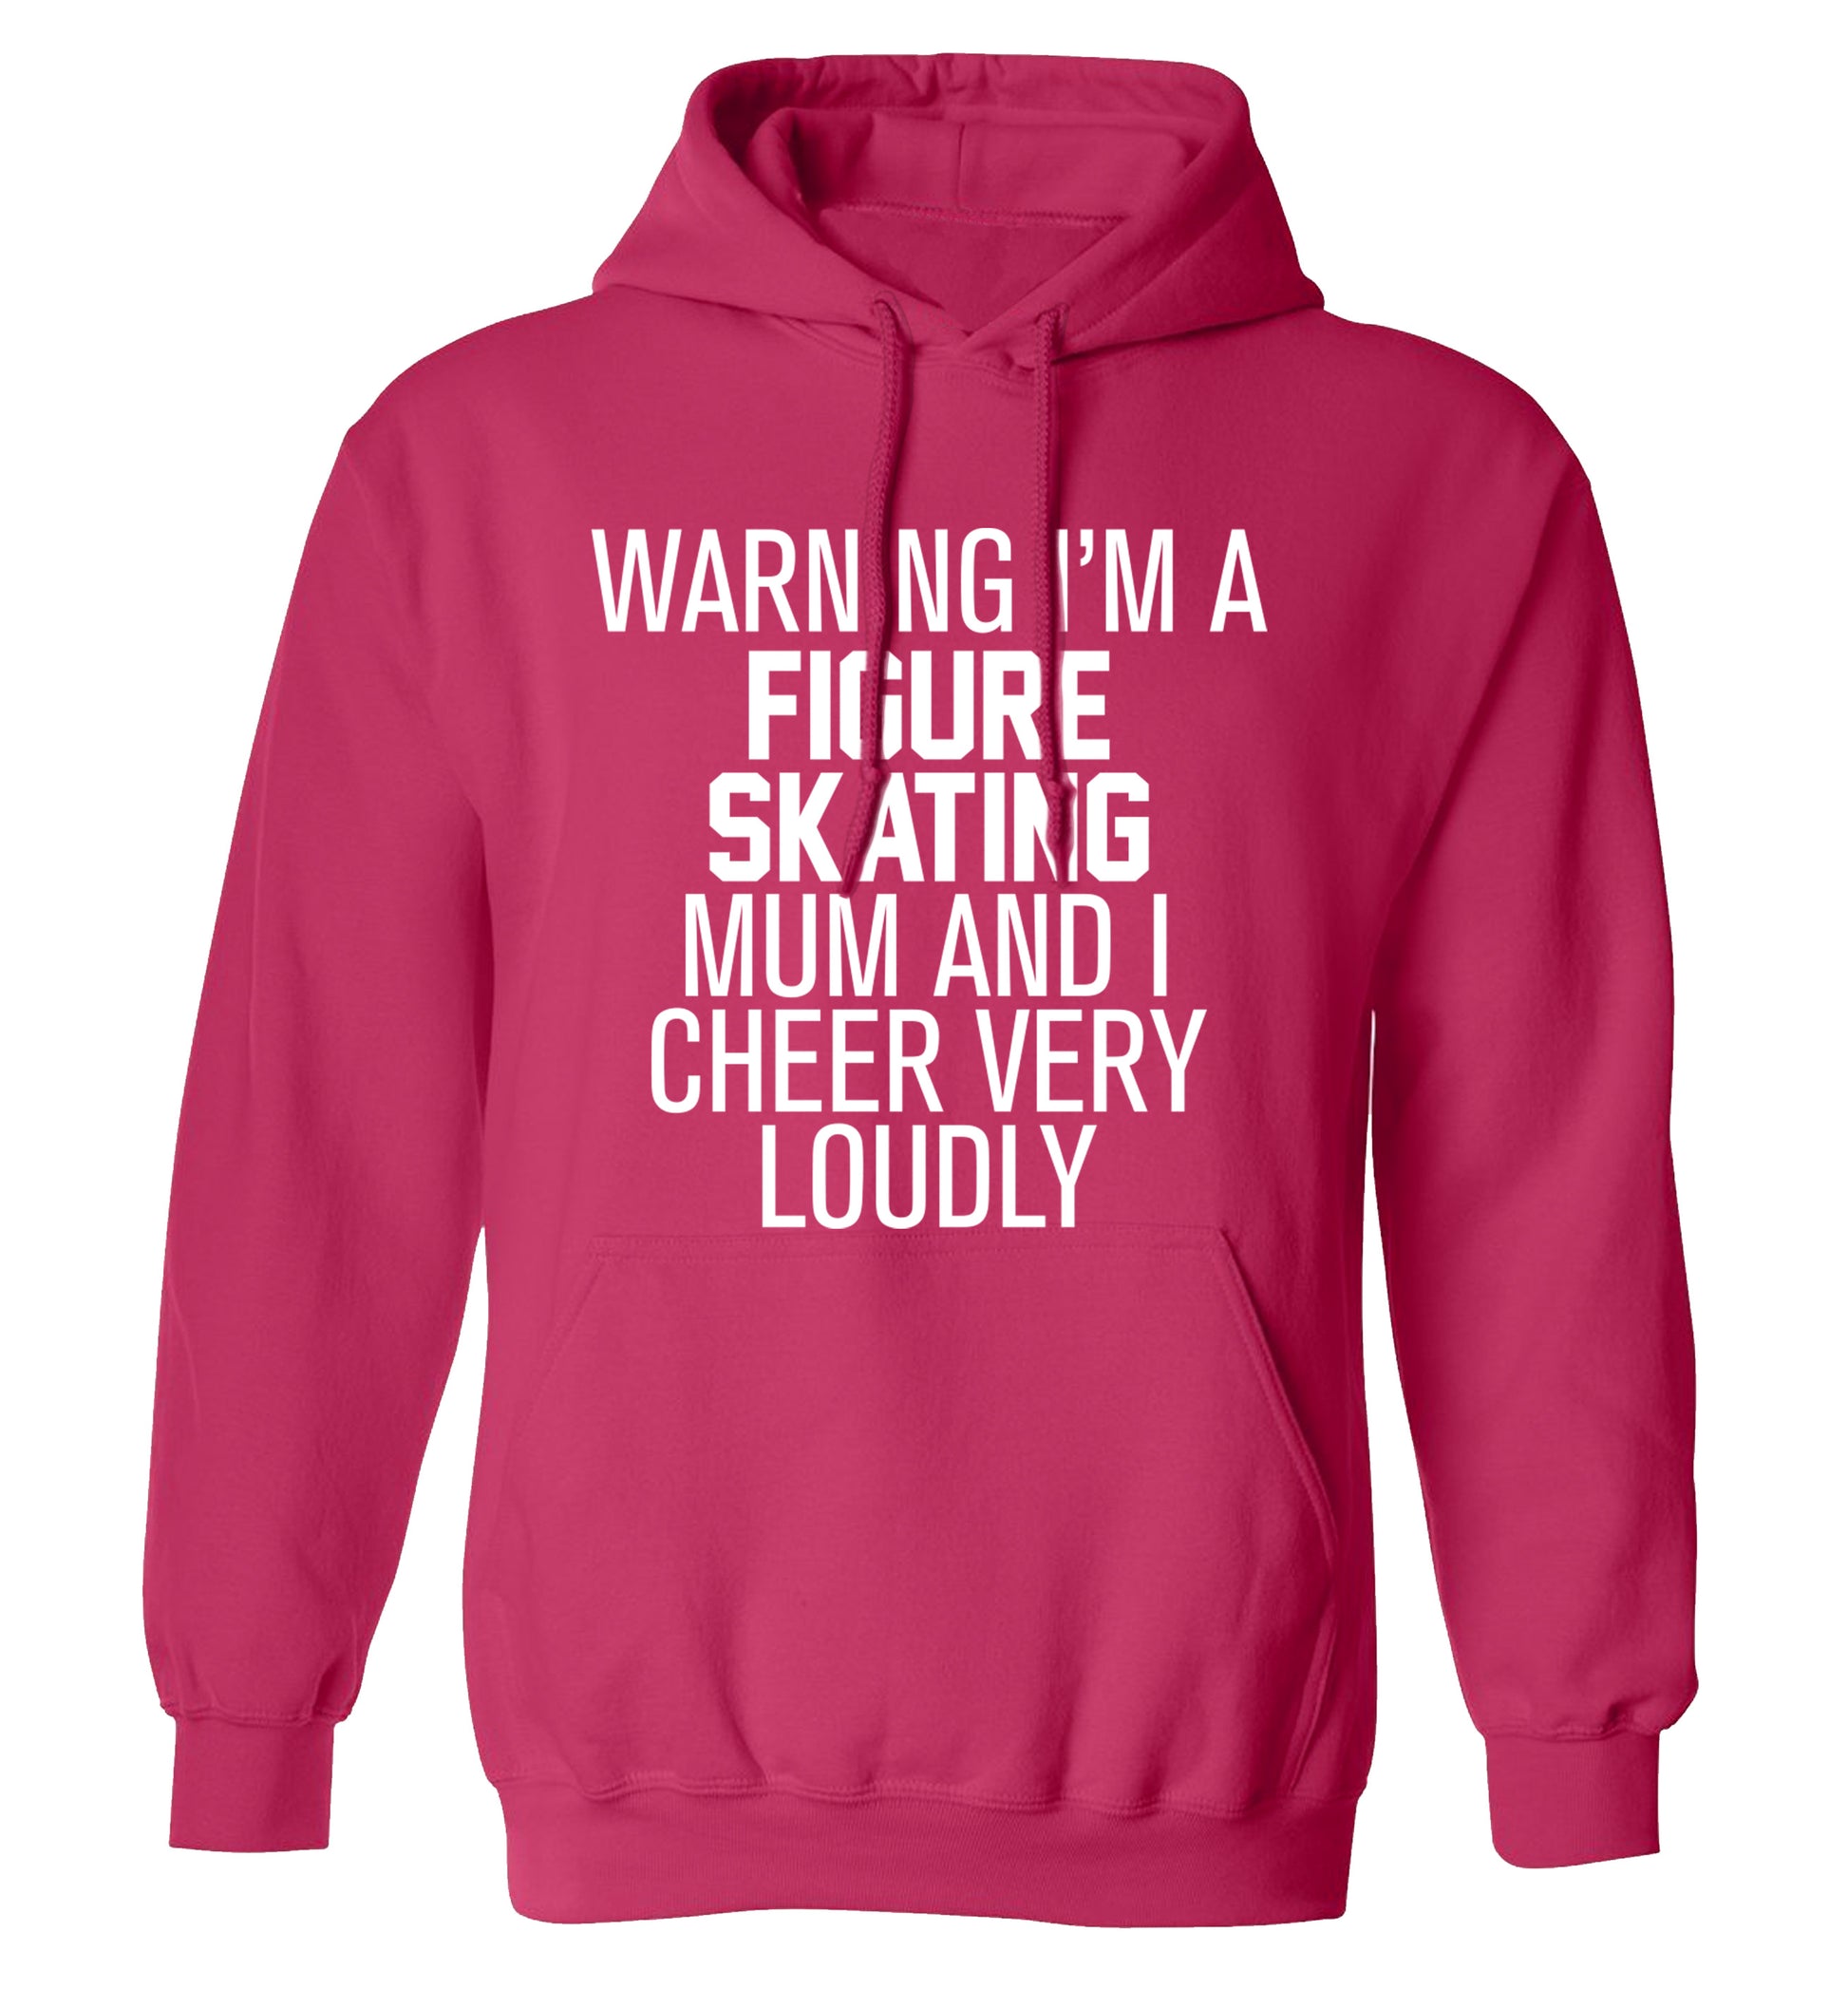 Warning I'm a figure skating mum and I cheer very loudly adults unisexpink hoodie 2XL